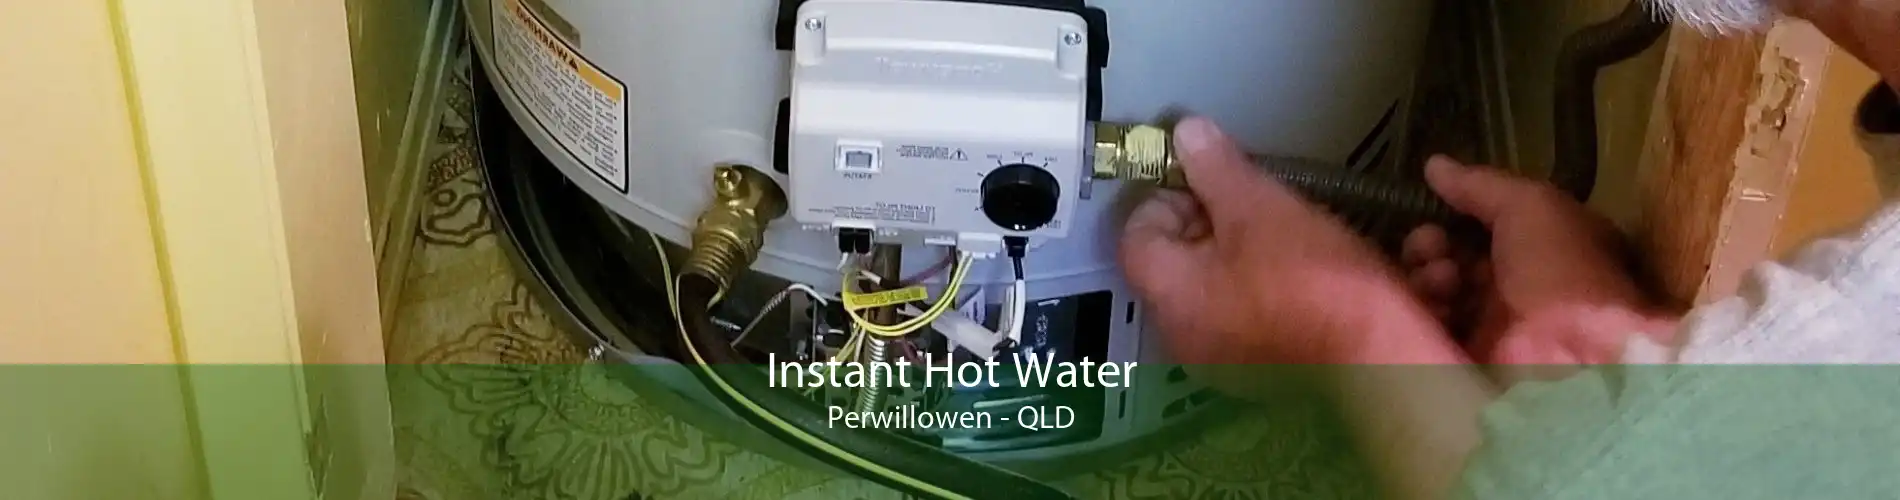 Instant Hot Water Perwillowen - QLD